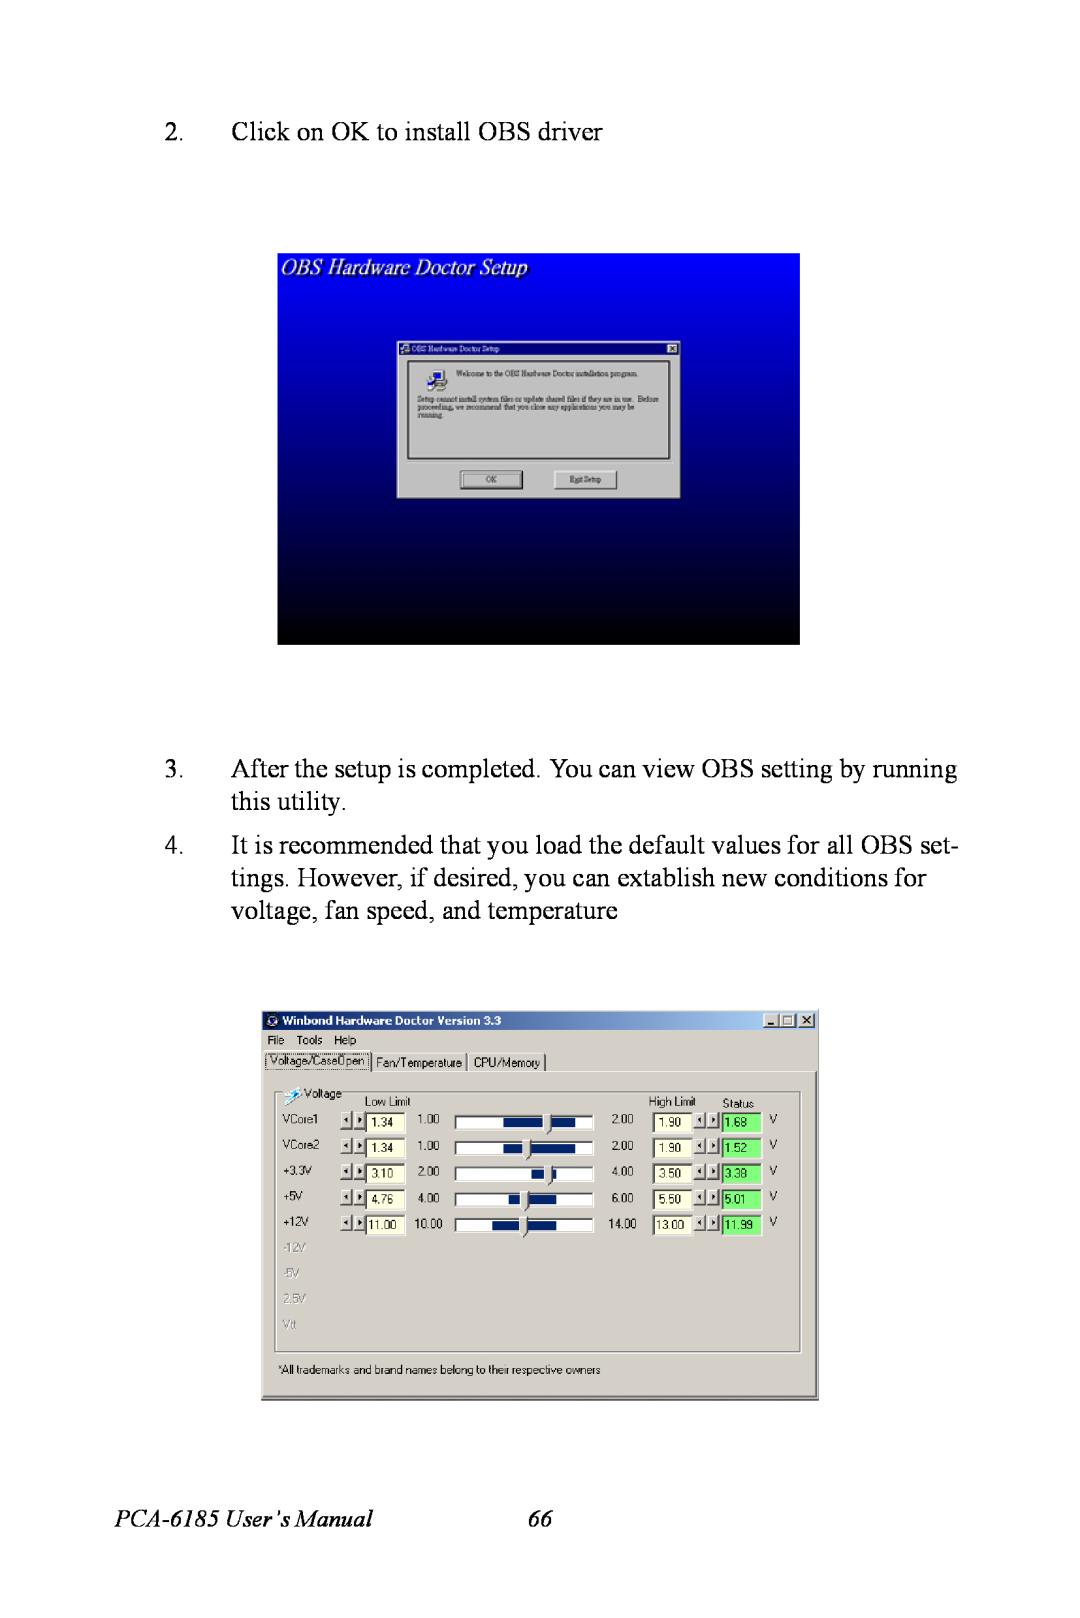 Advantech PCA-6185 user manual Click on OK to install OBS driver 